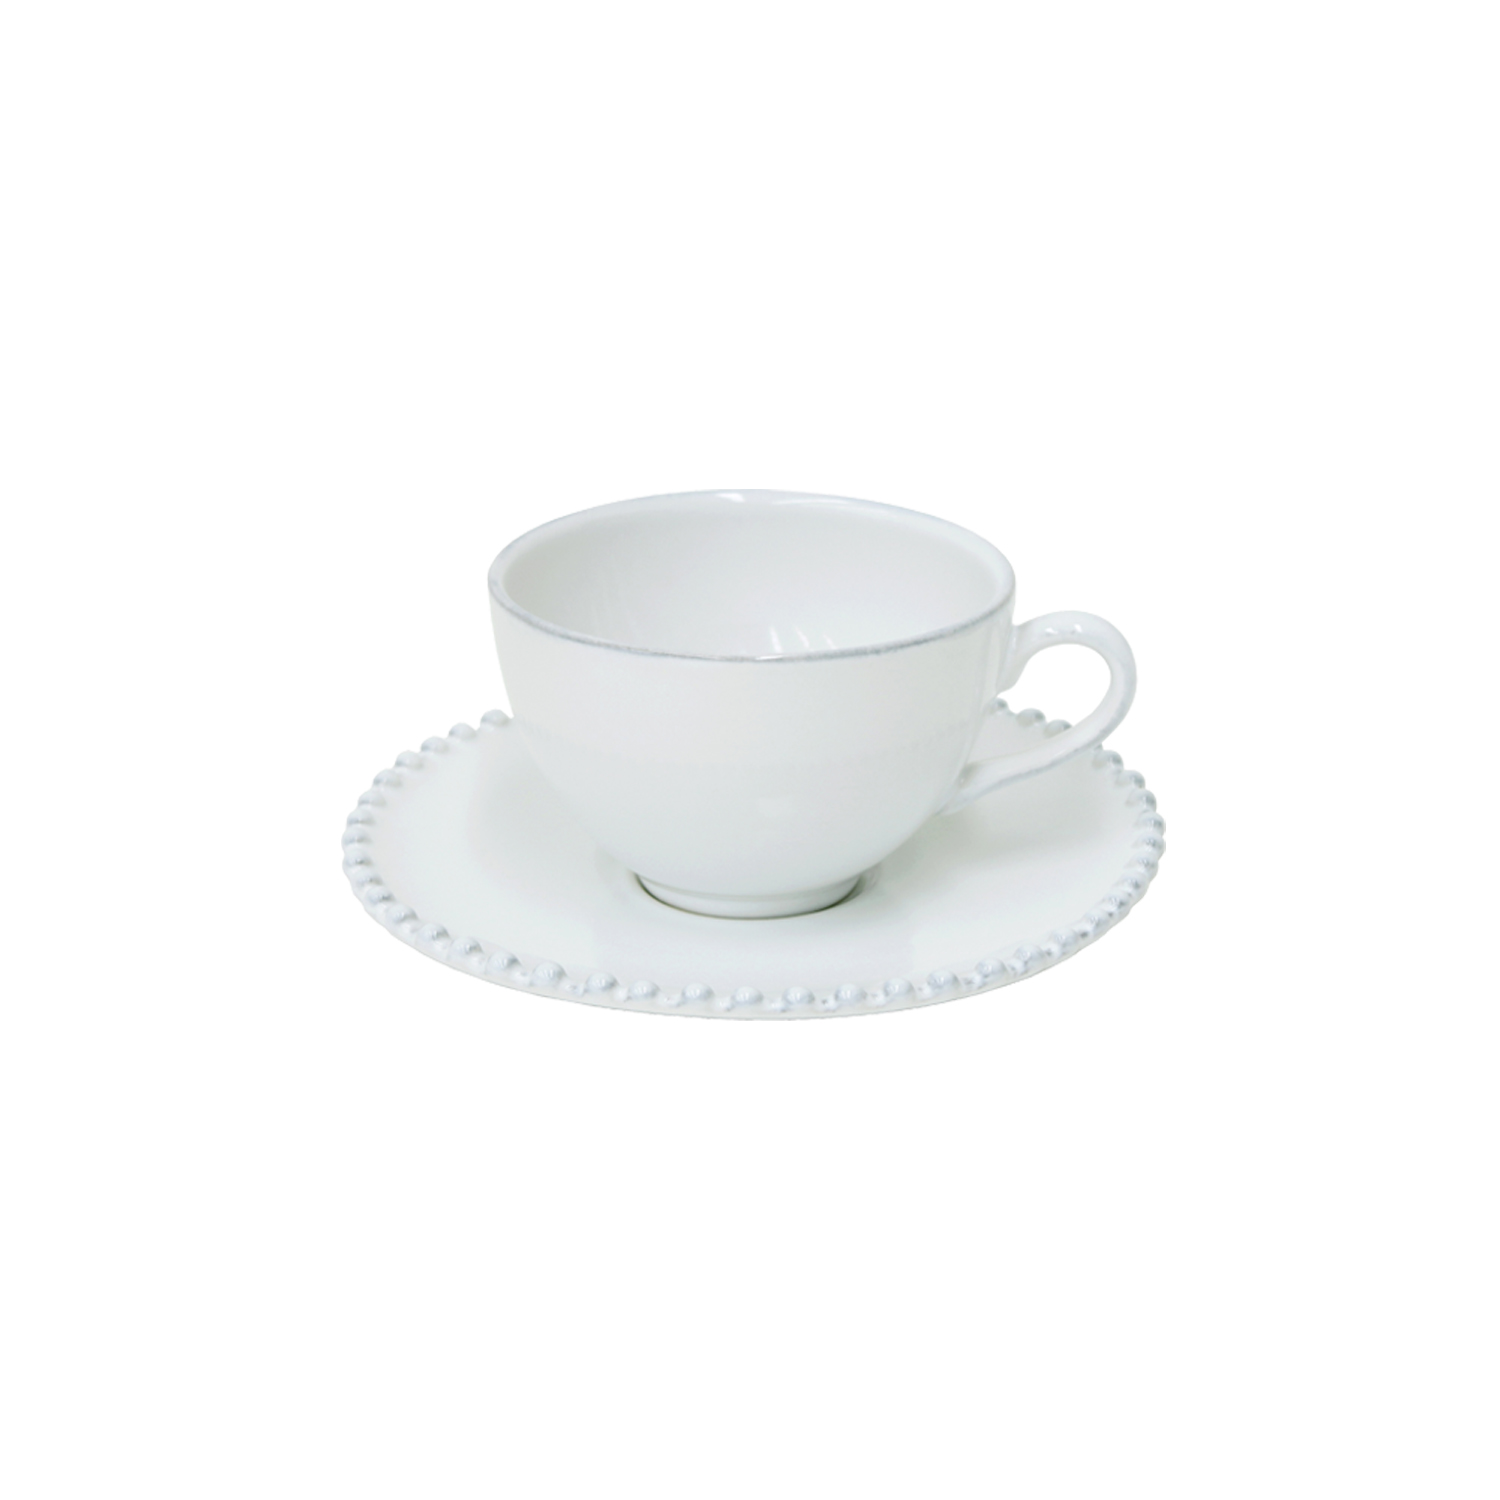 Pearl White Tea Cup & Saucer 0.25l Gift